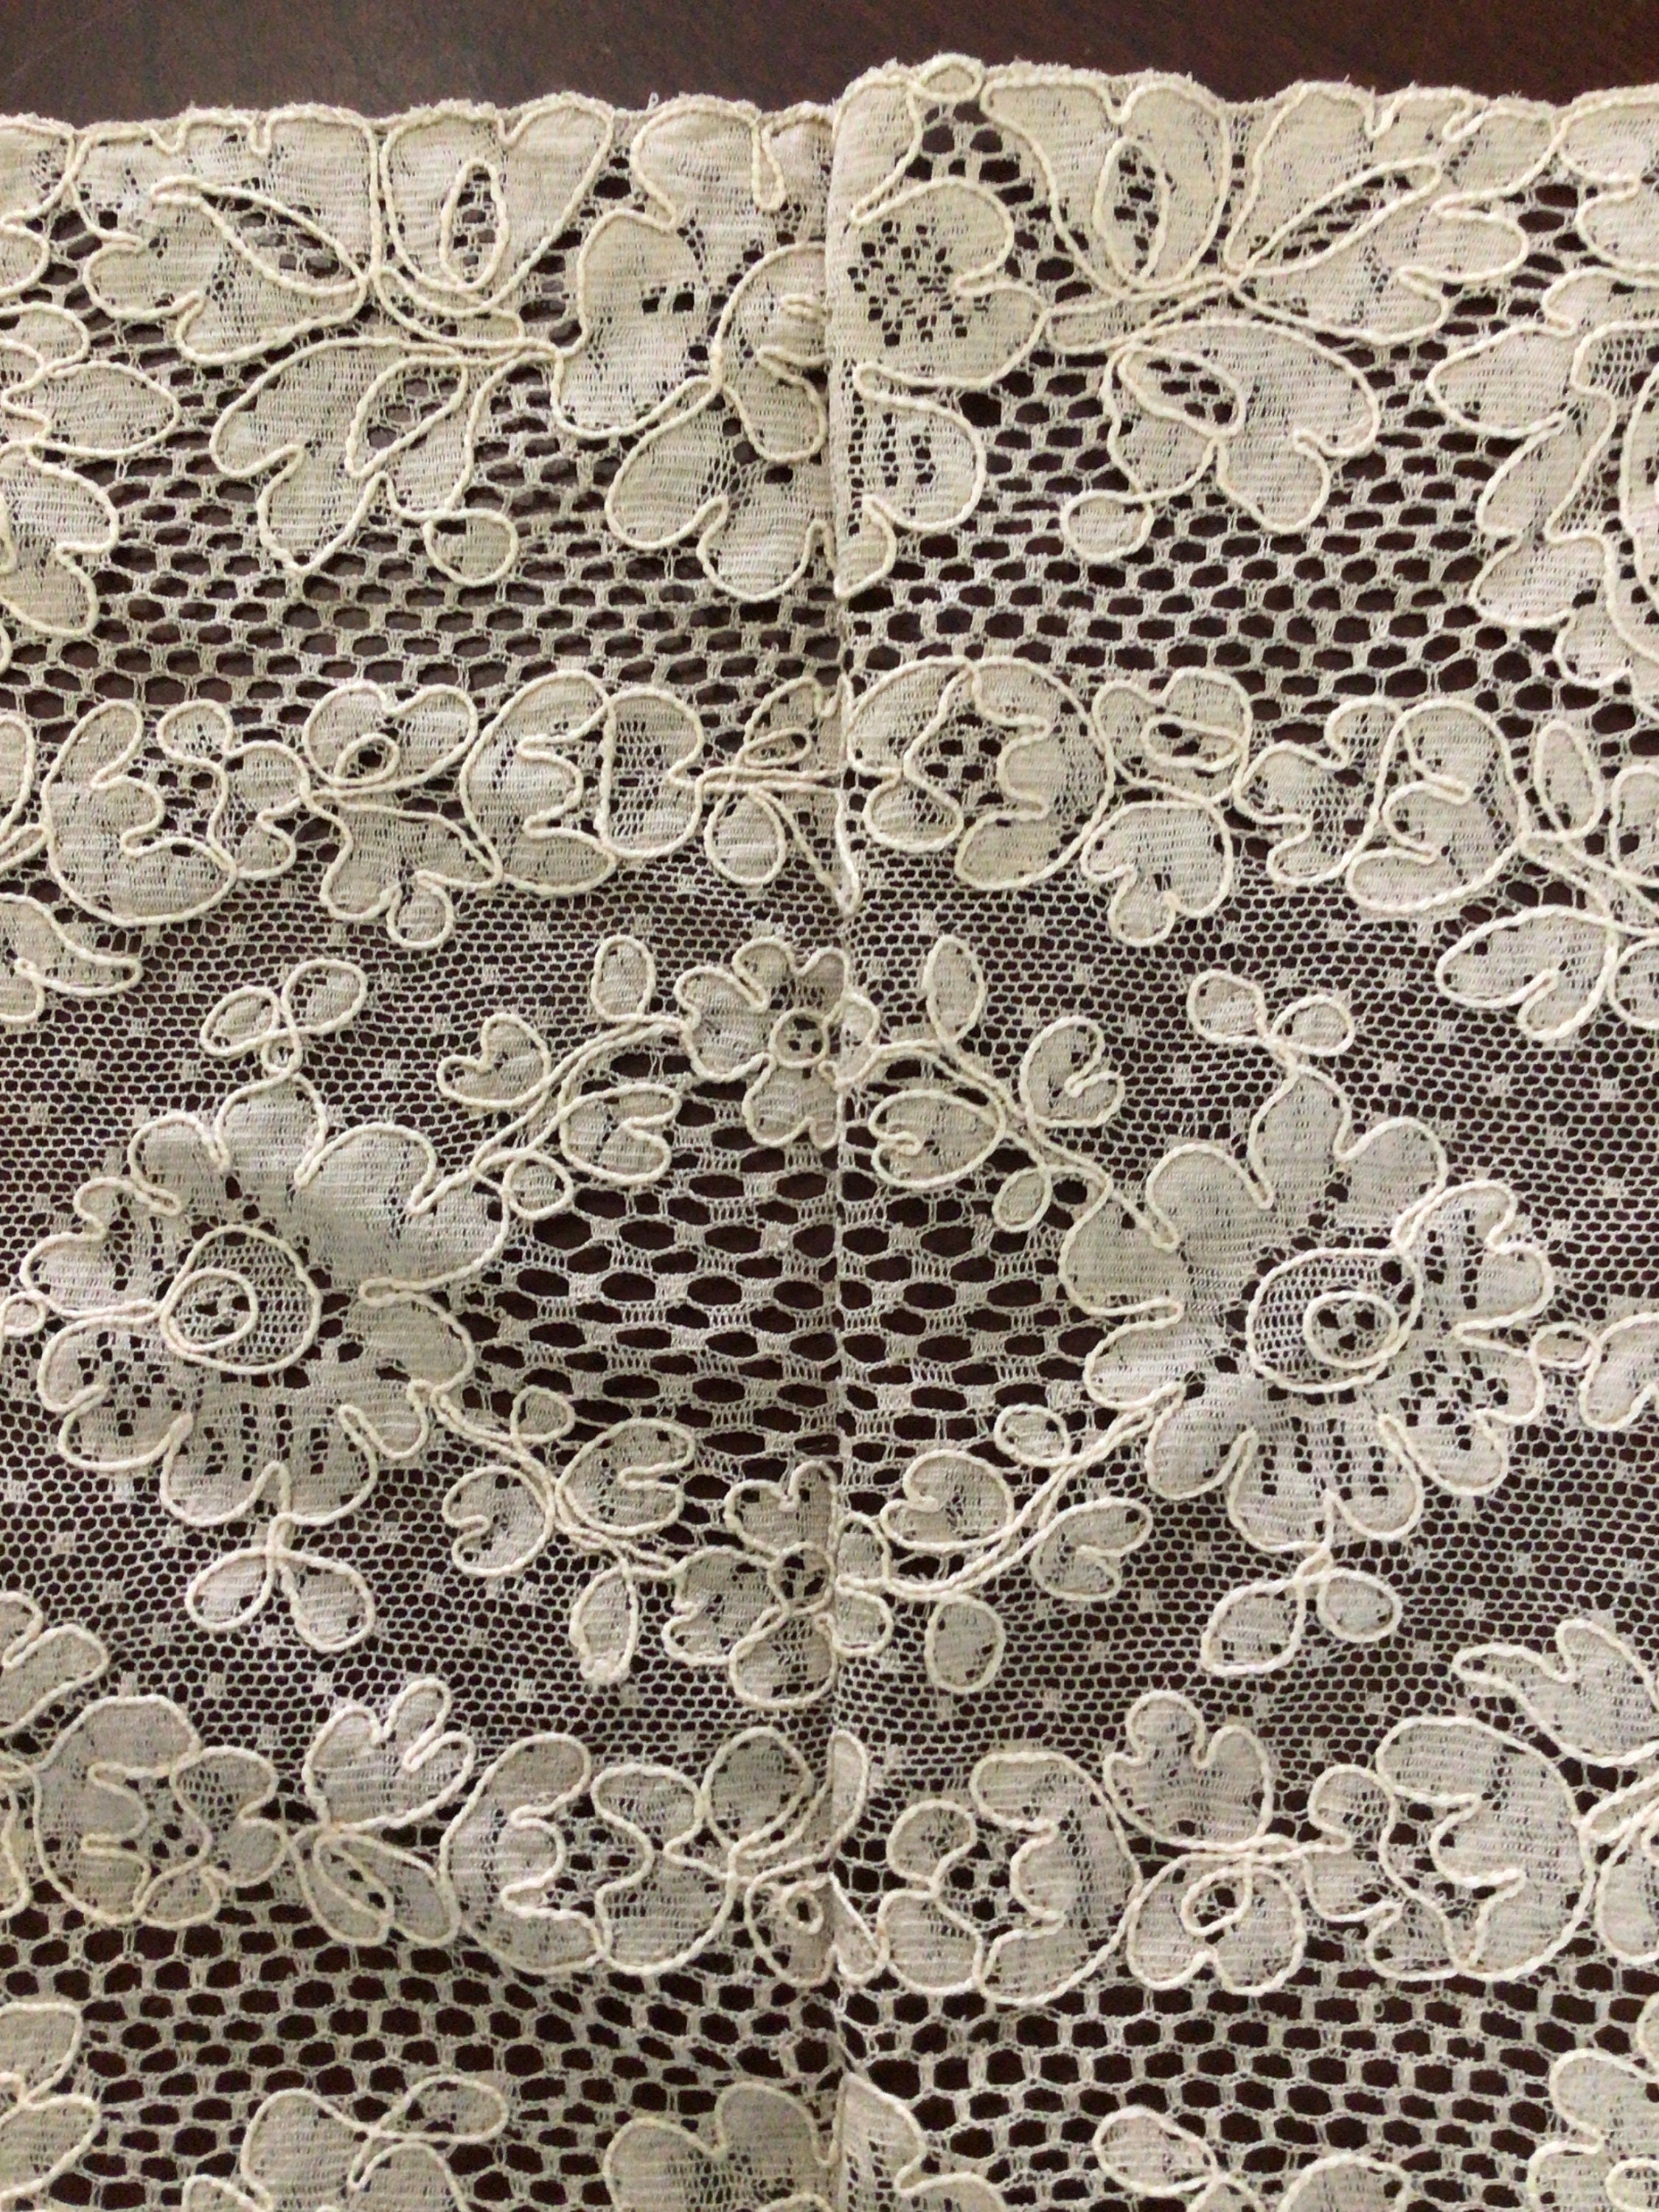 4 Inch Wide White or Cream Leavers Lace Trim 9 Yds 891 